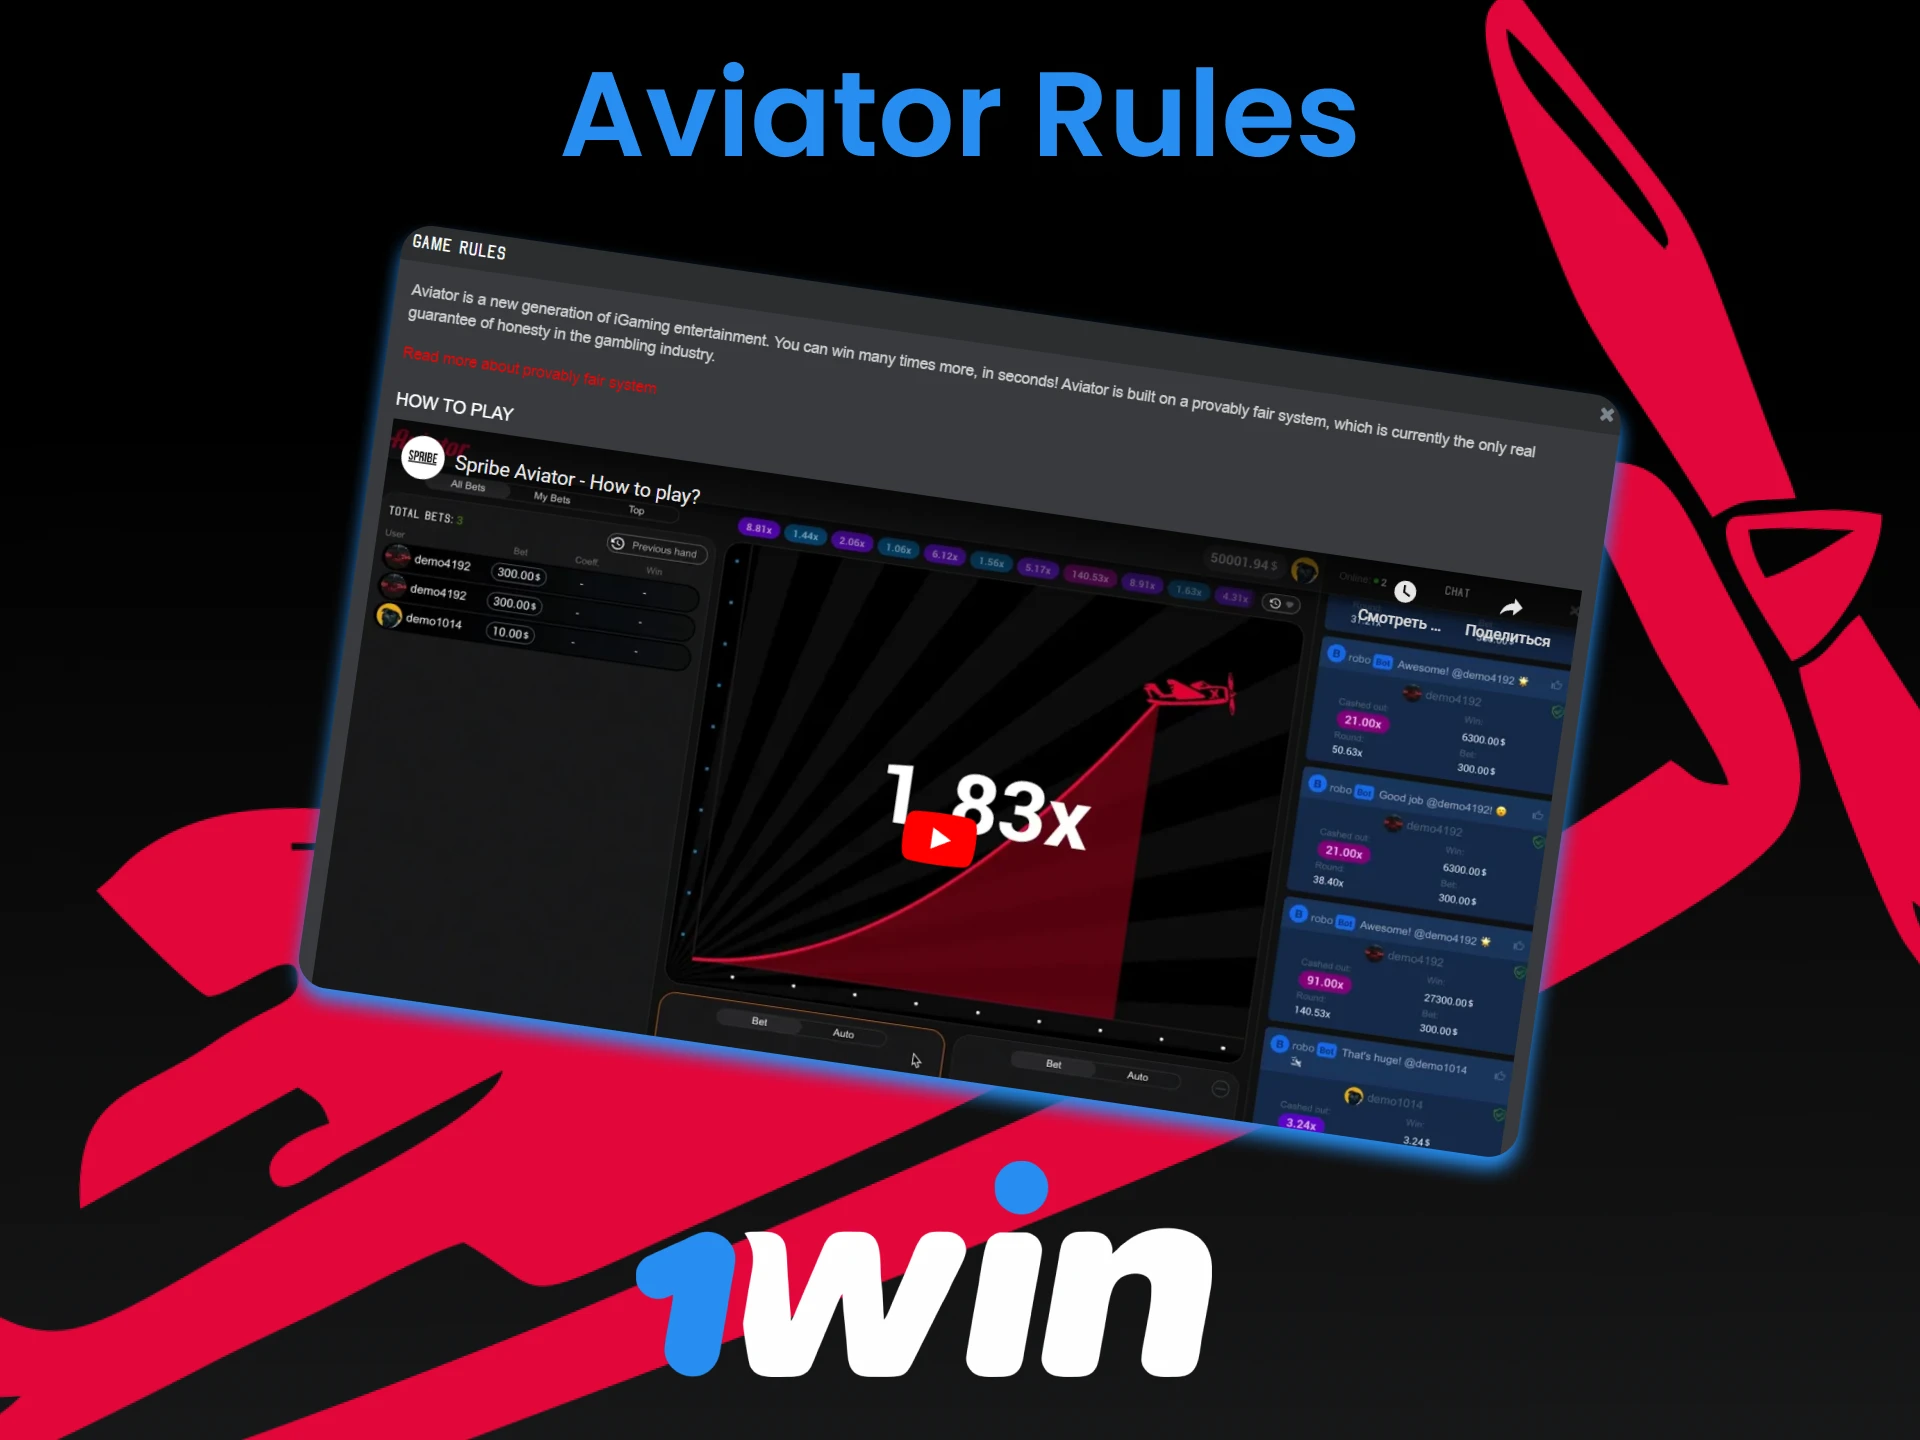 Follow the rules of the game in Aviator from 1win.